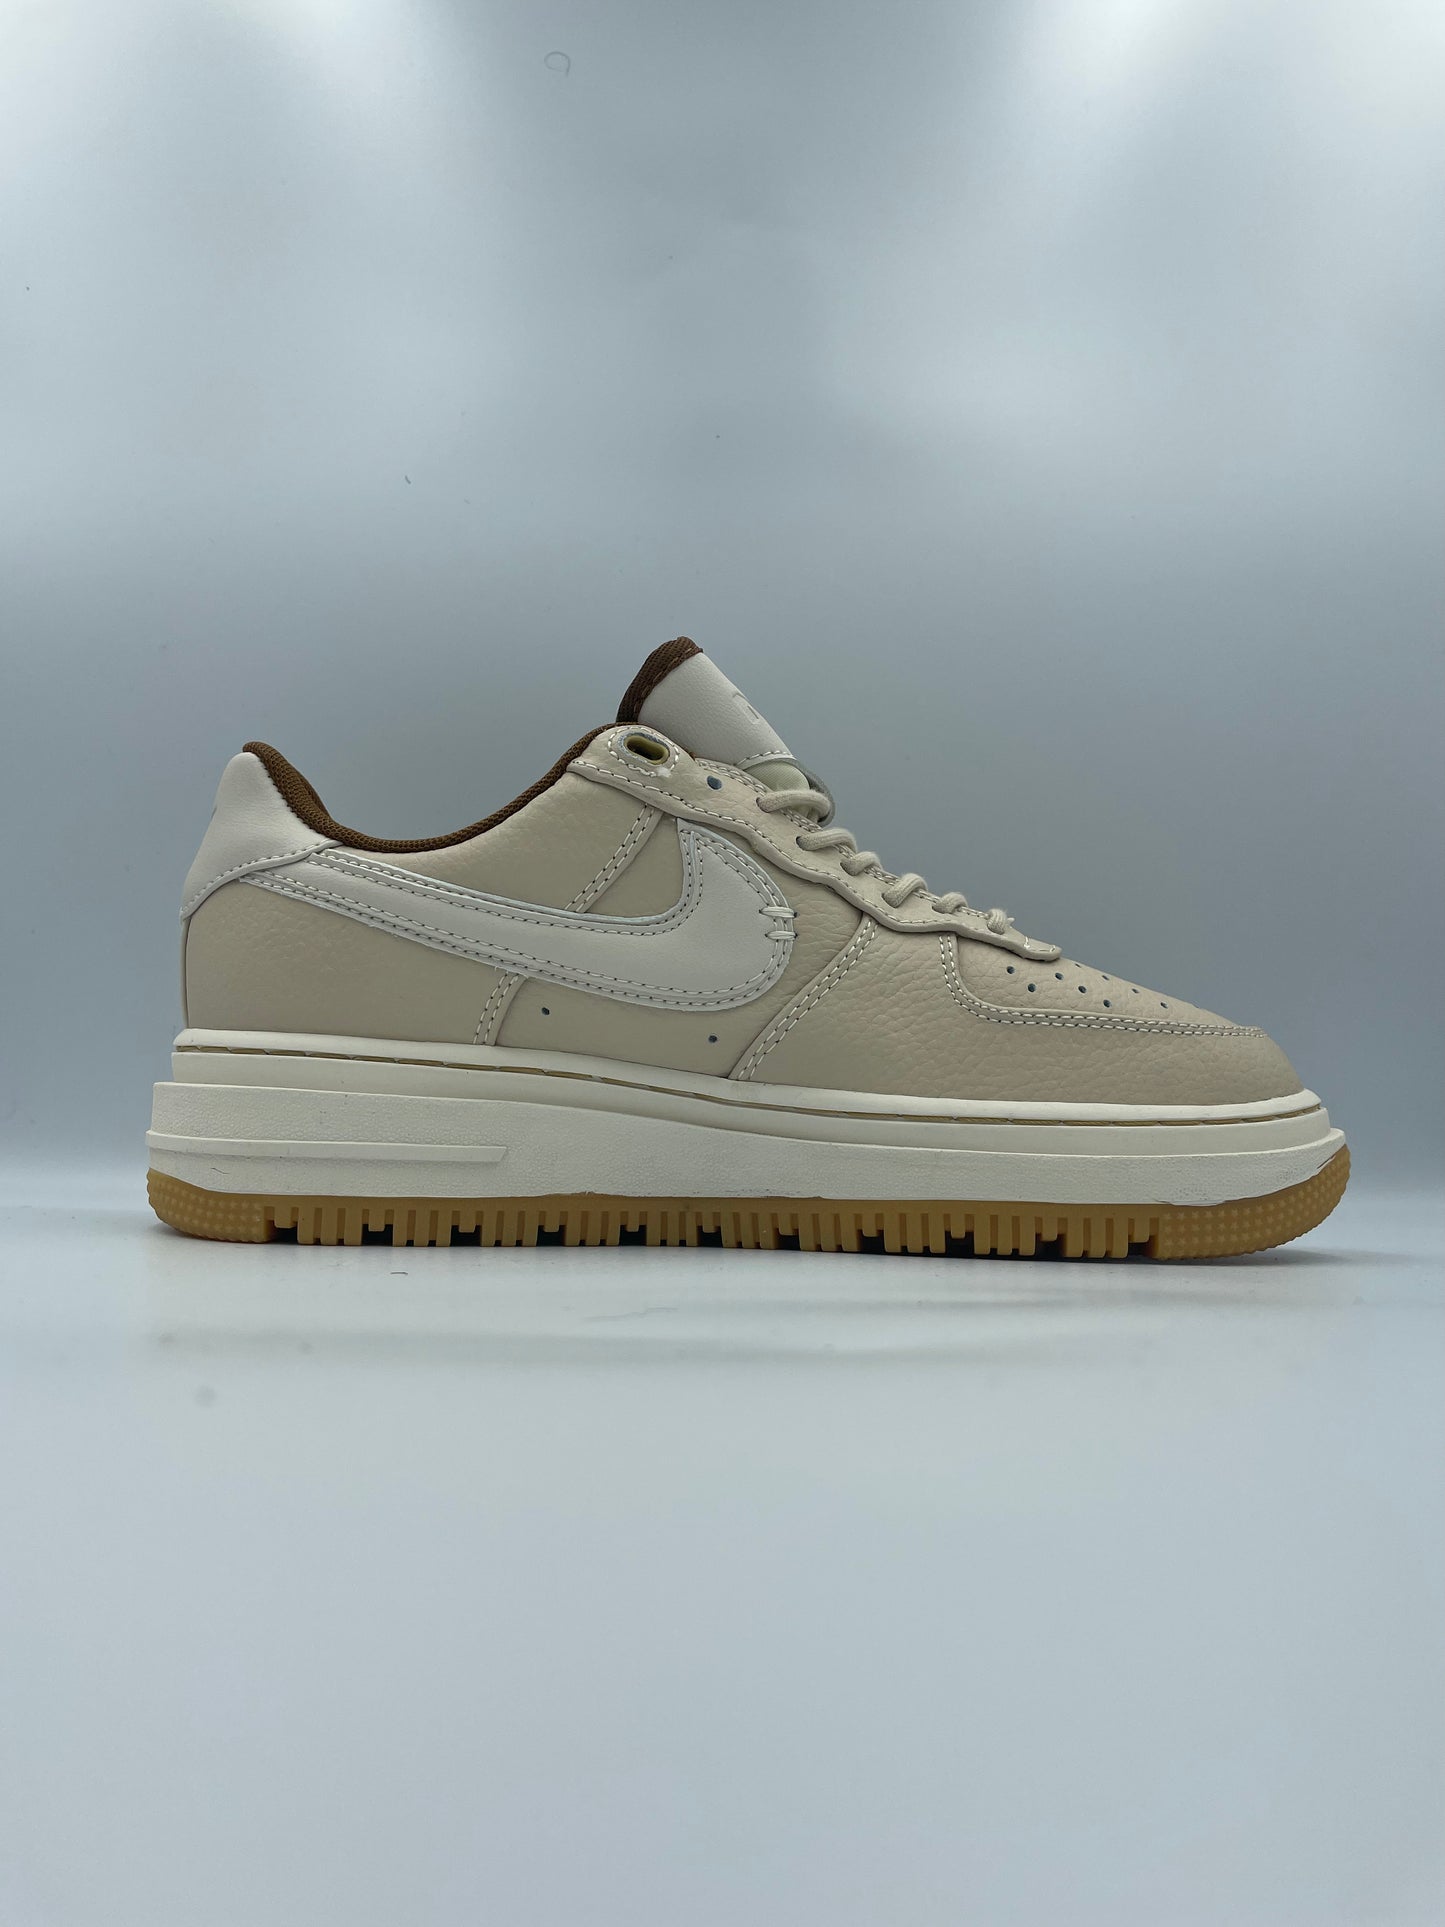 NIKE AIR FORCE 1 ‘LUXE PEACAN’